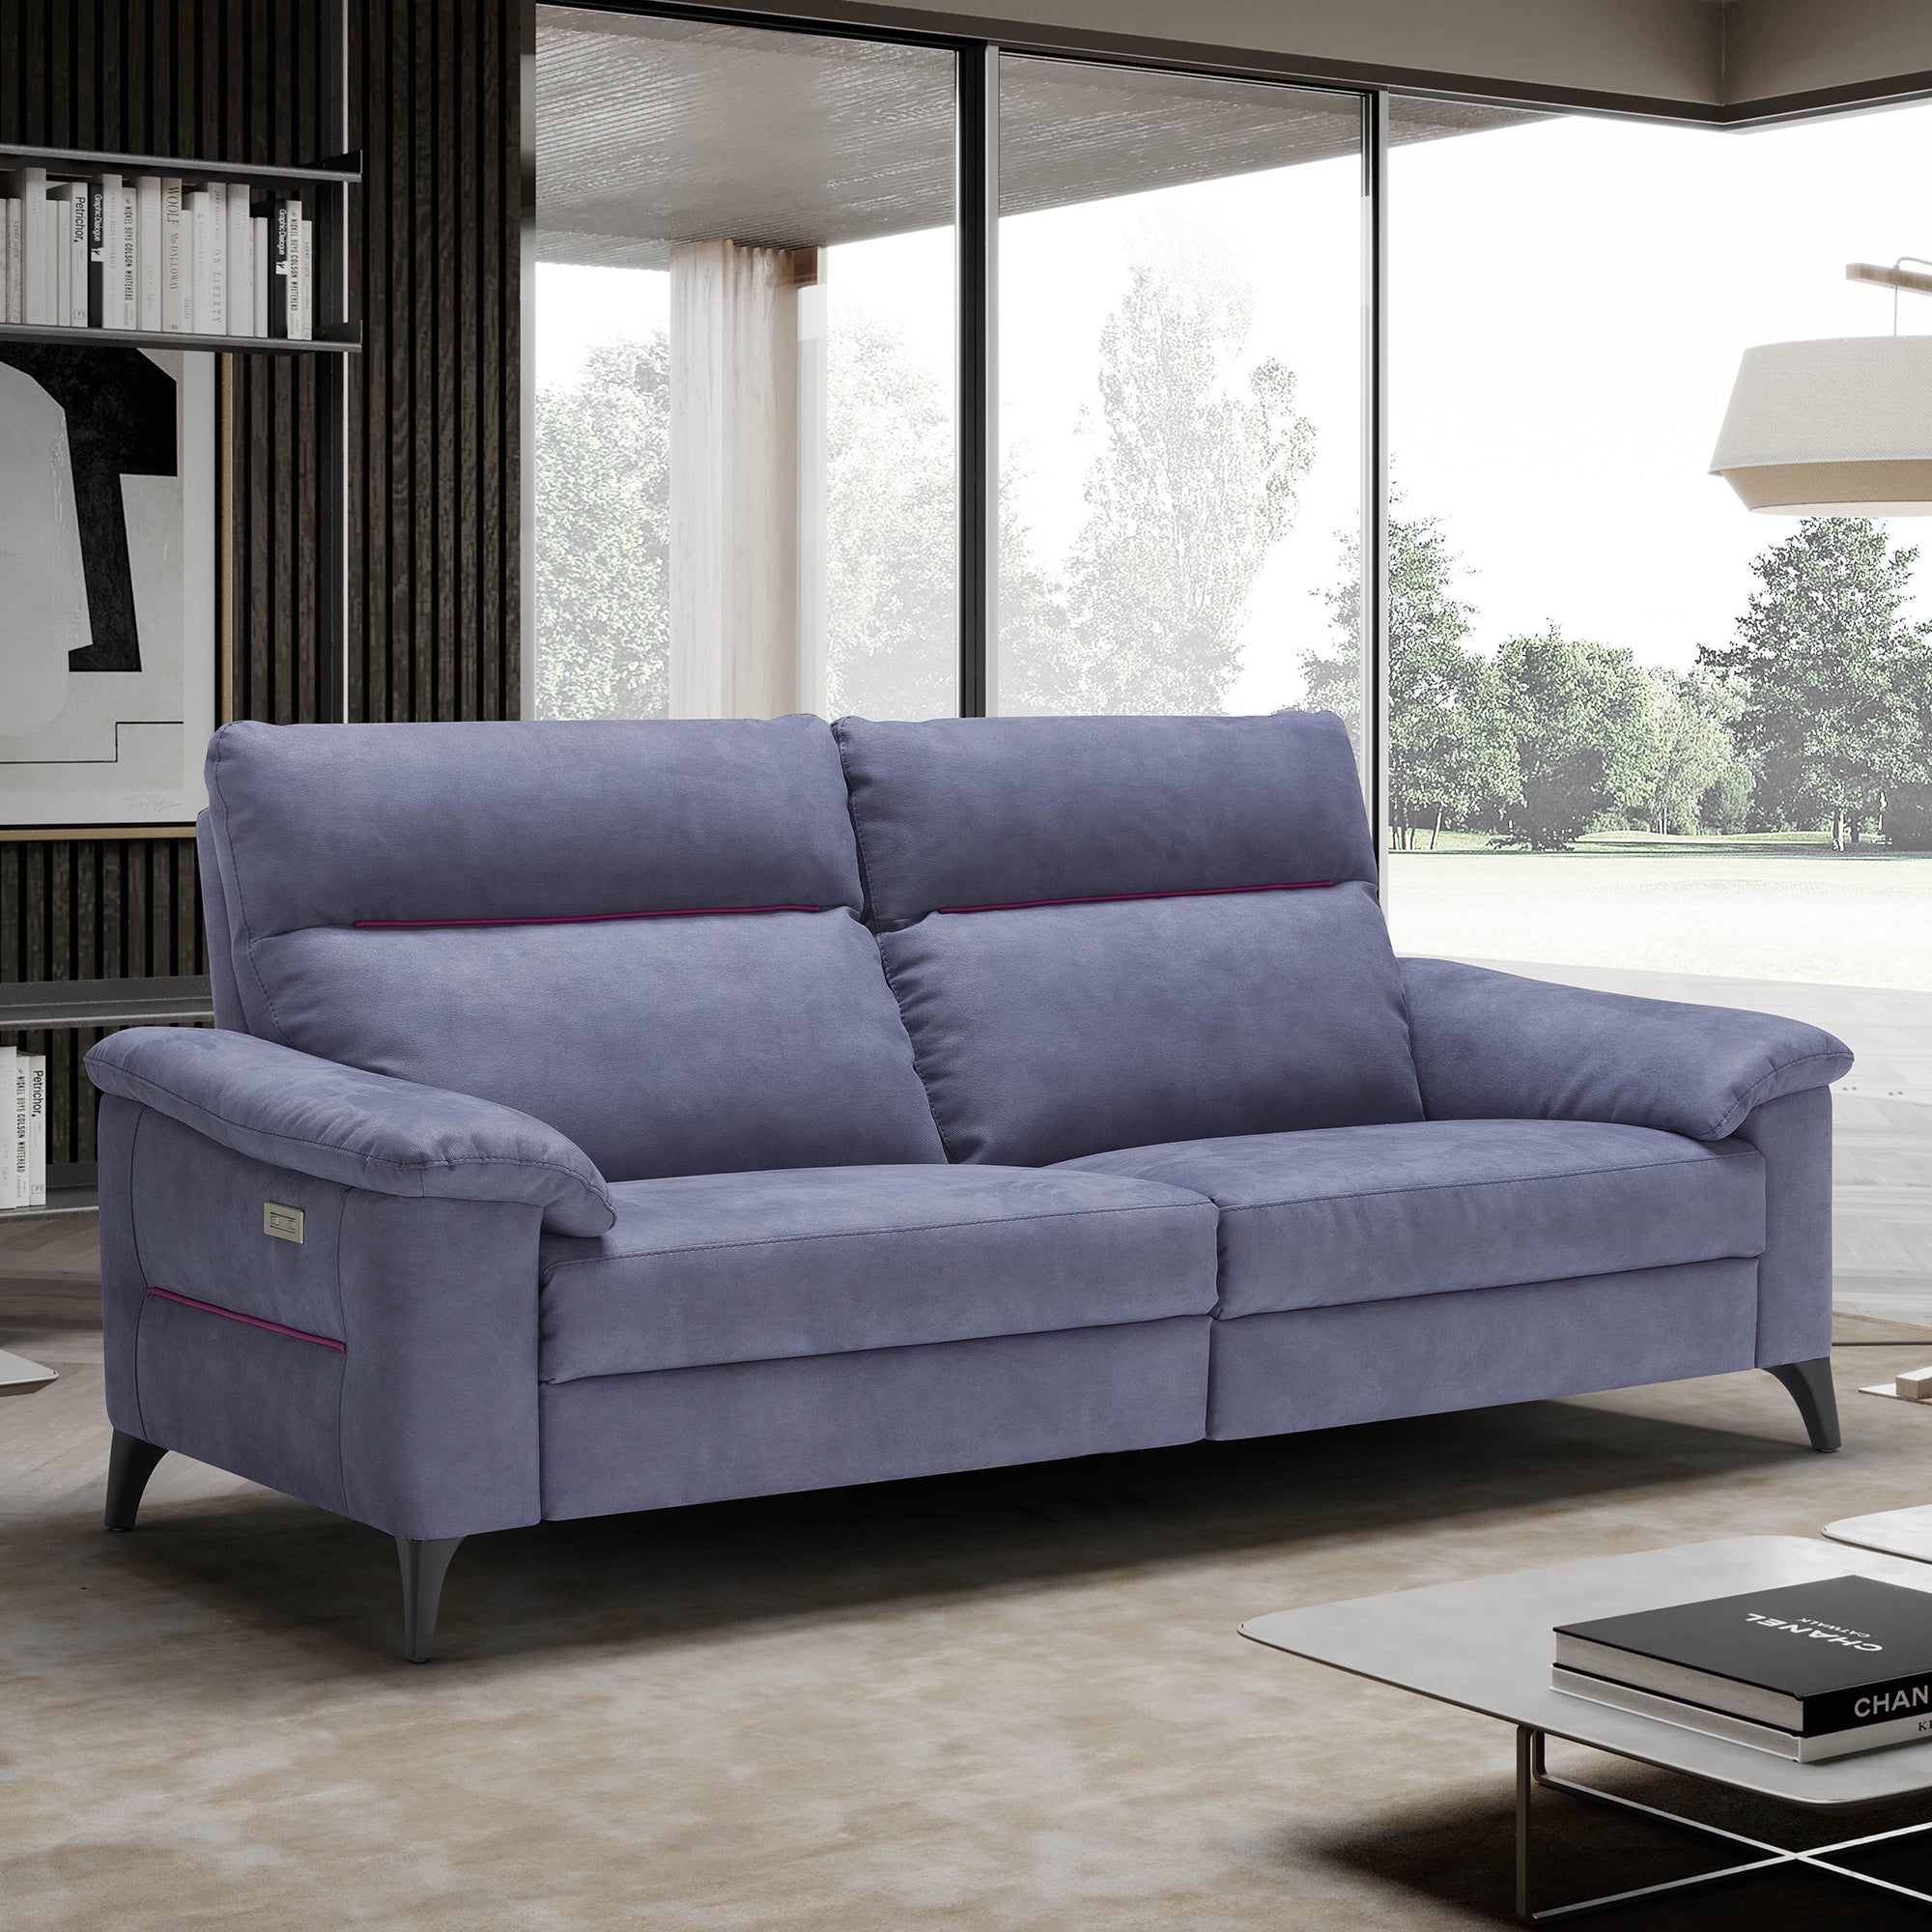 Treviso - 2 Seat 2 Power Recliner Sofa In Fabric Or Leather Microfibre